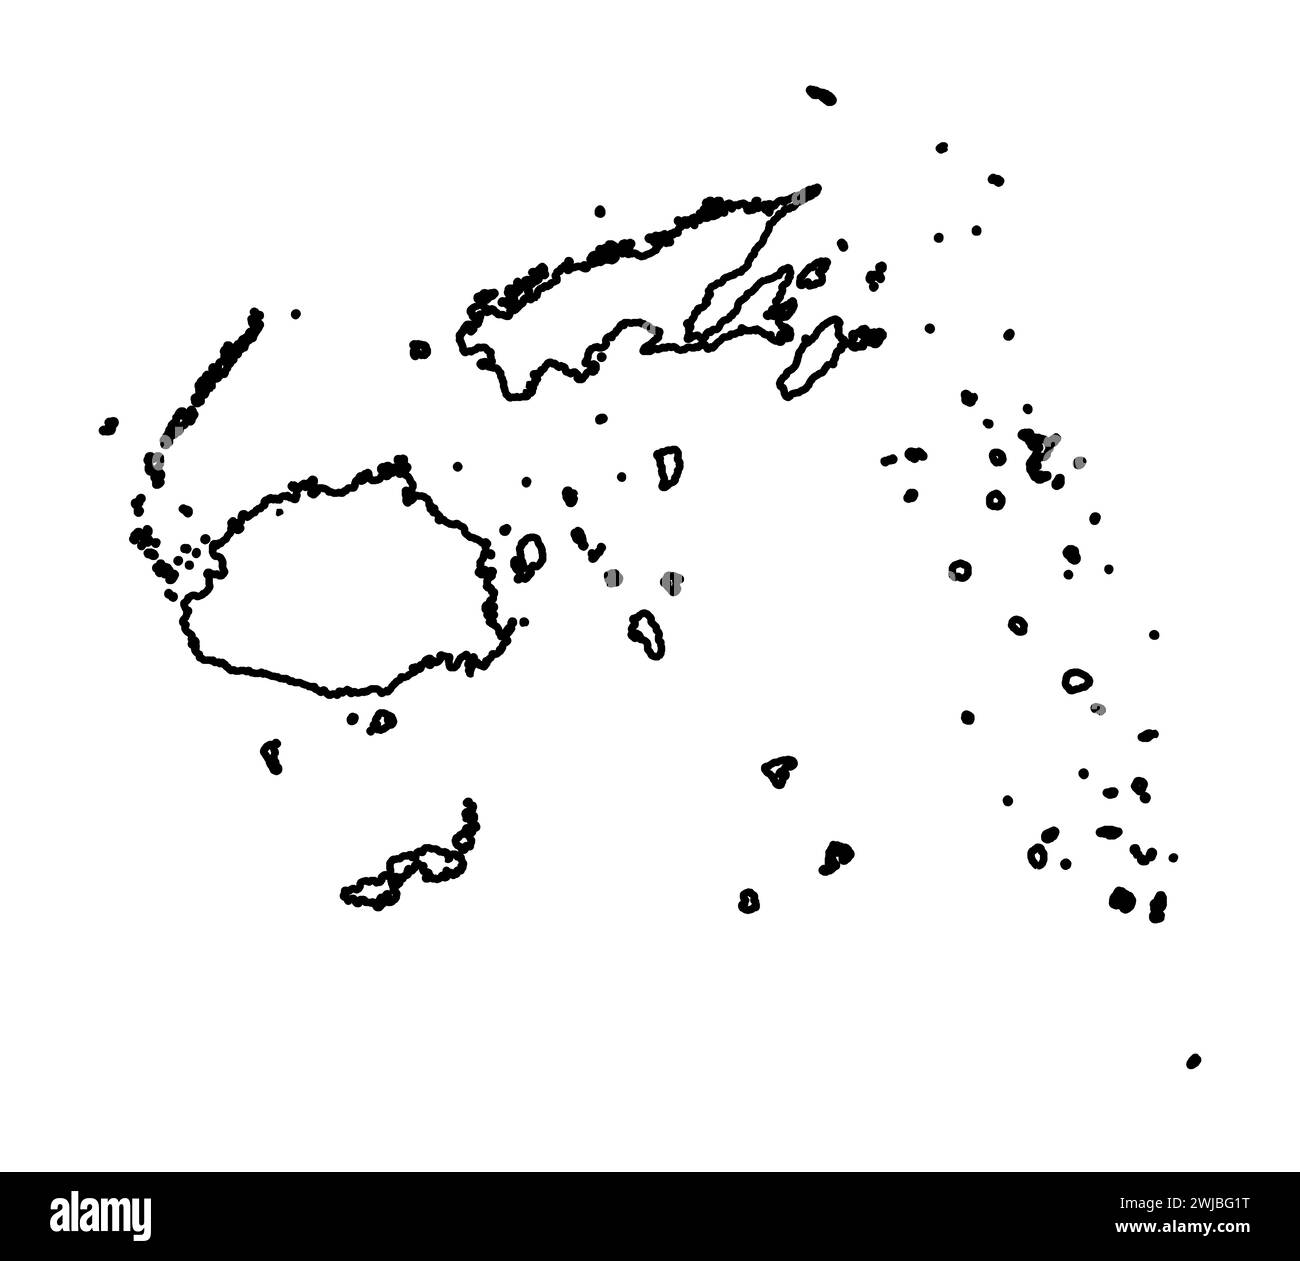 Map outline silhouette of the country islands of Fiji Stock Photo